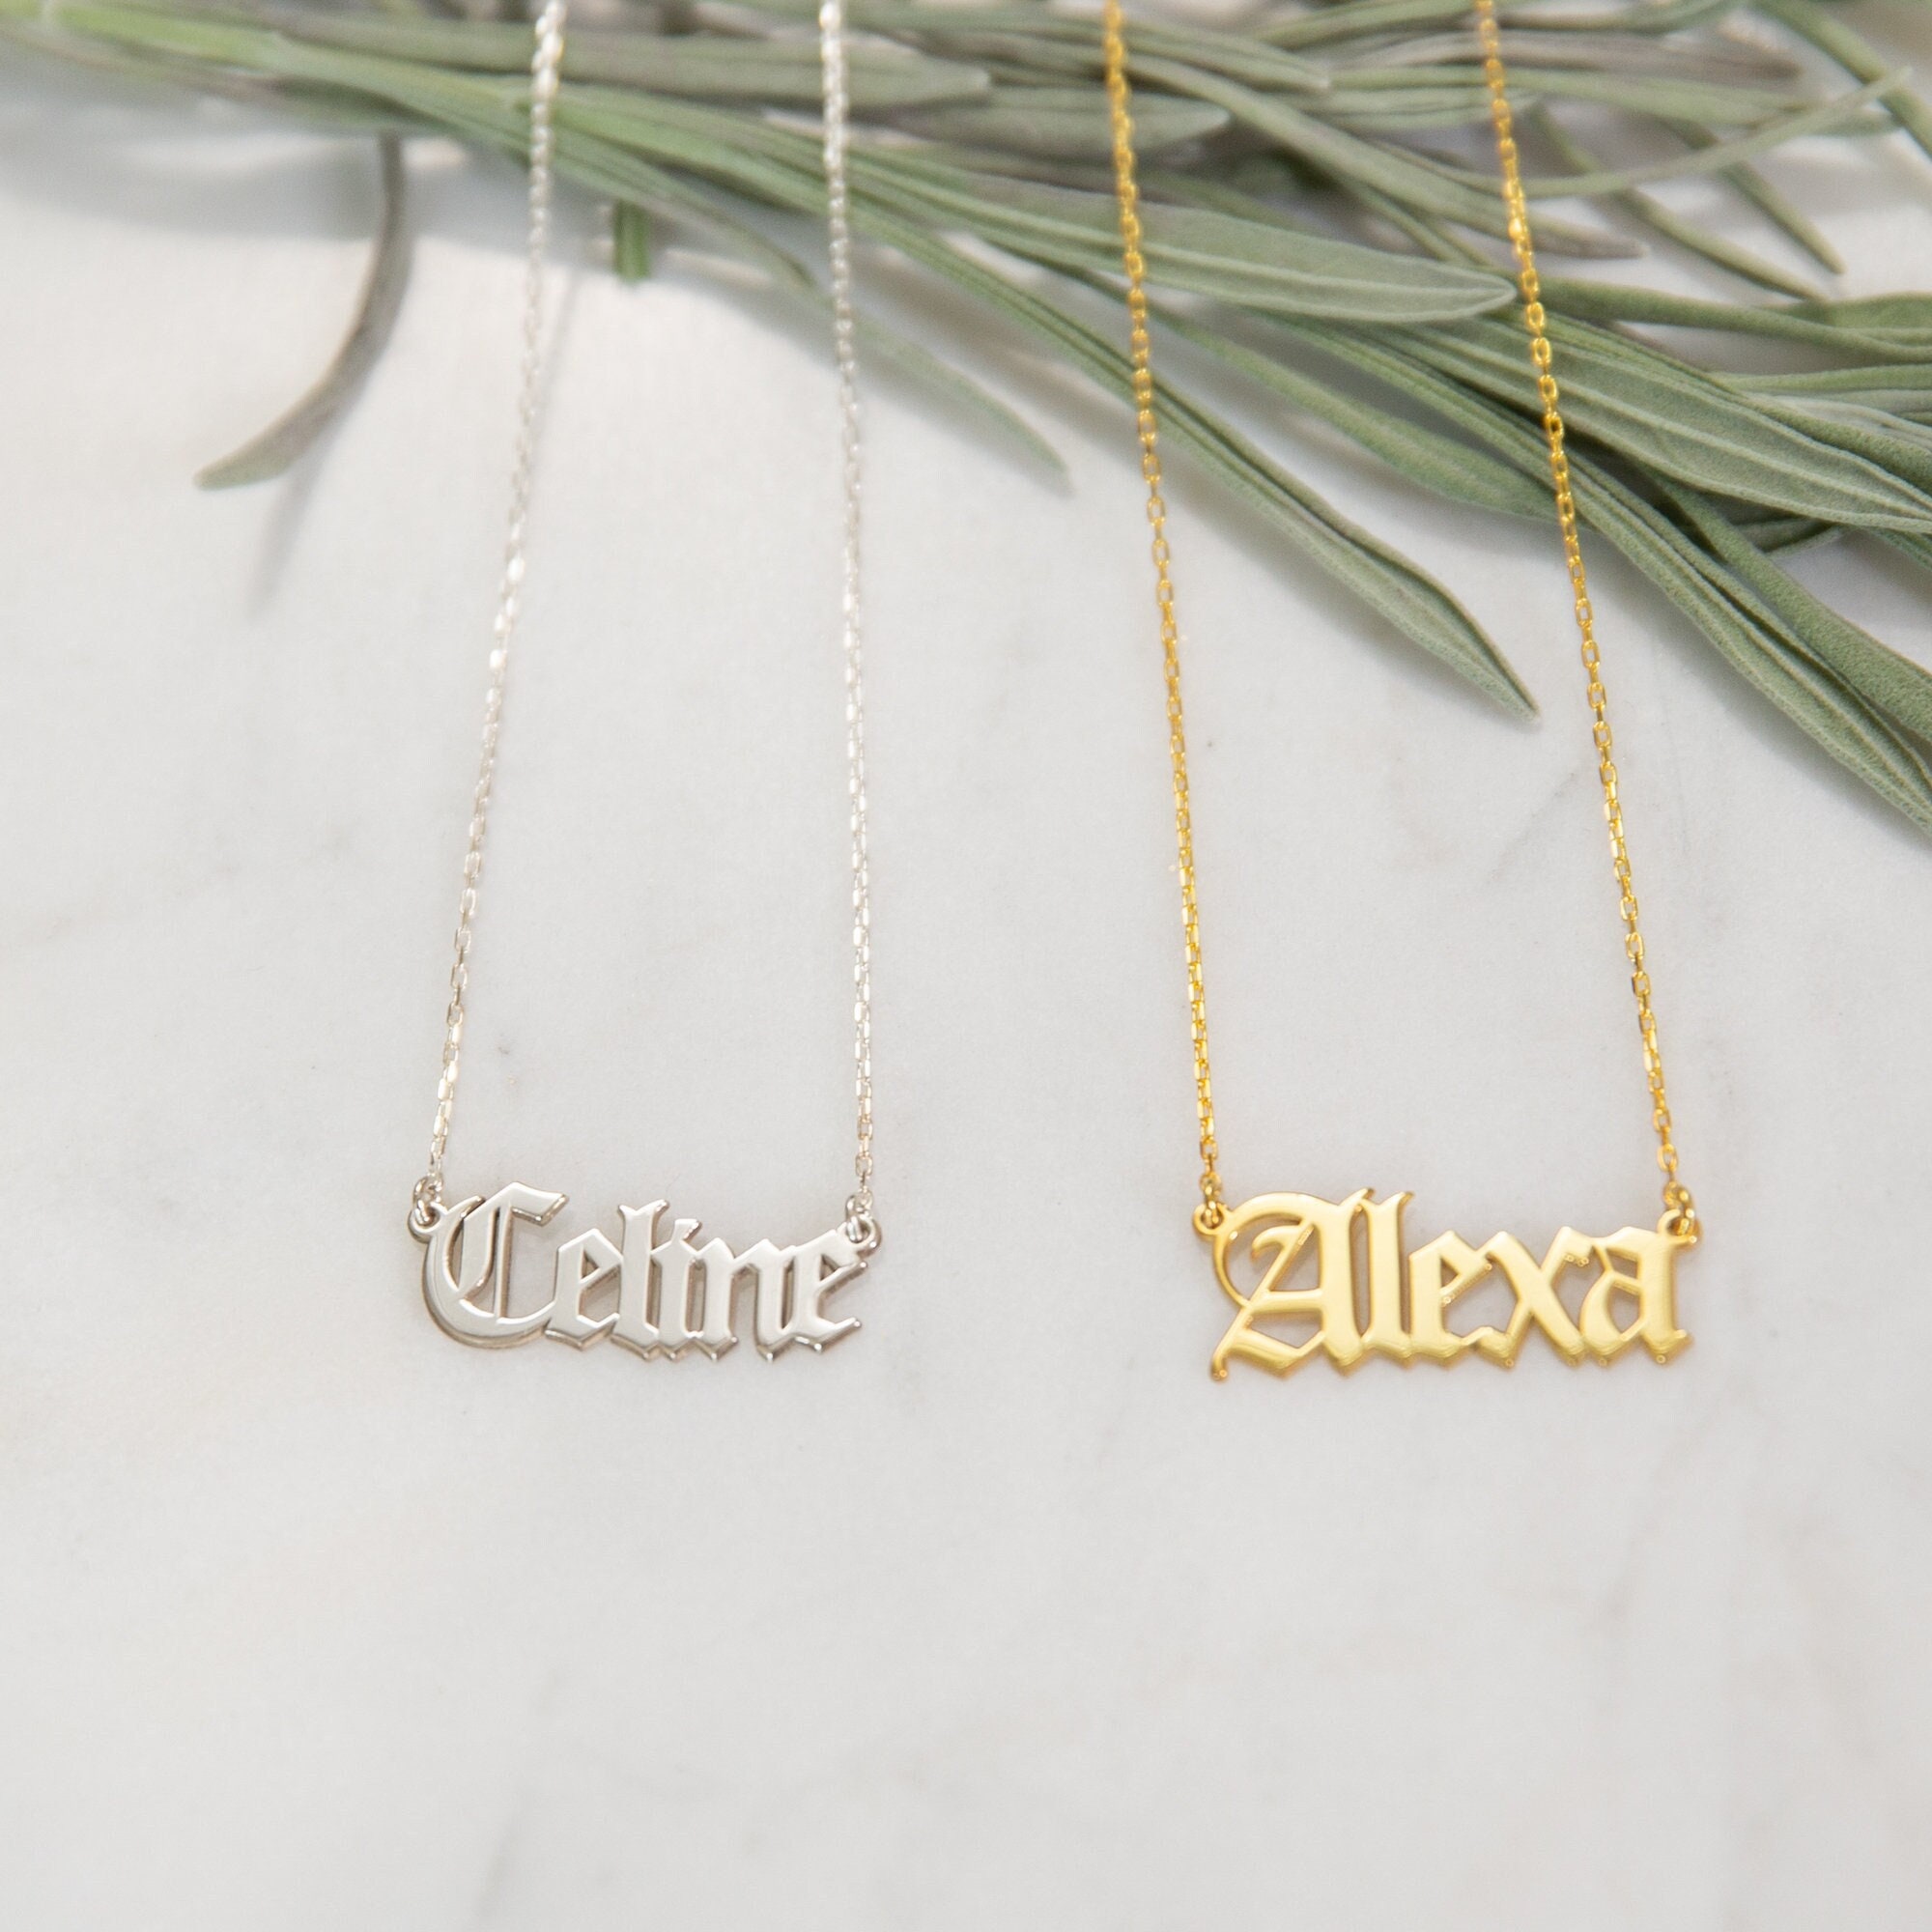 9ct Gold Gothic Old English Initial Pendant or Necklace - Optional Chain - Decorative Fancy Gold Letter Pendant